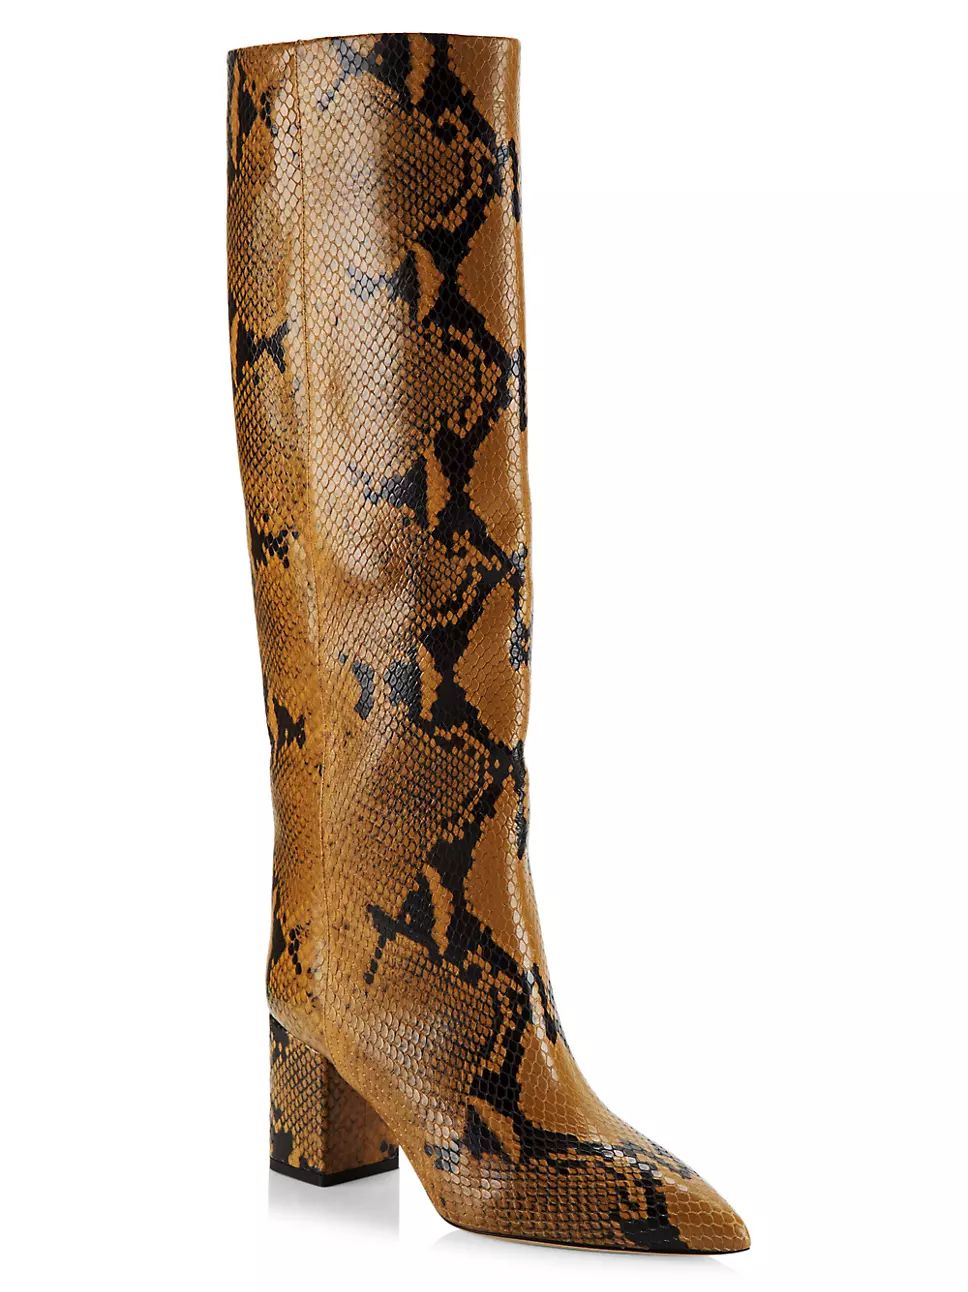 Anja Snake-Effect Leather Knee-High Boots | Saks Fifth Avenue